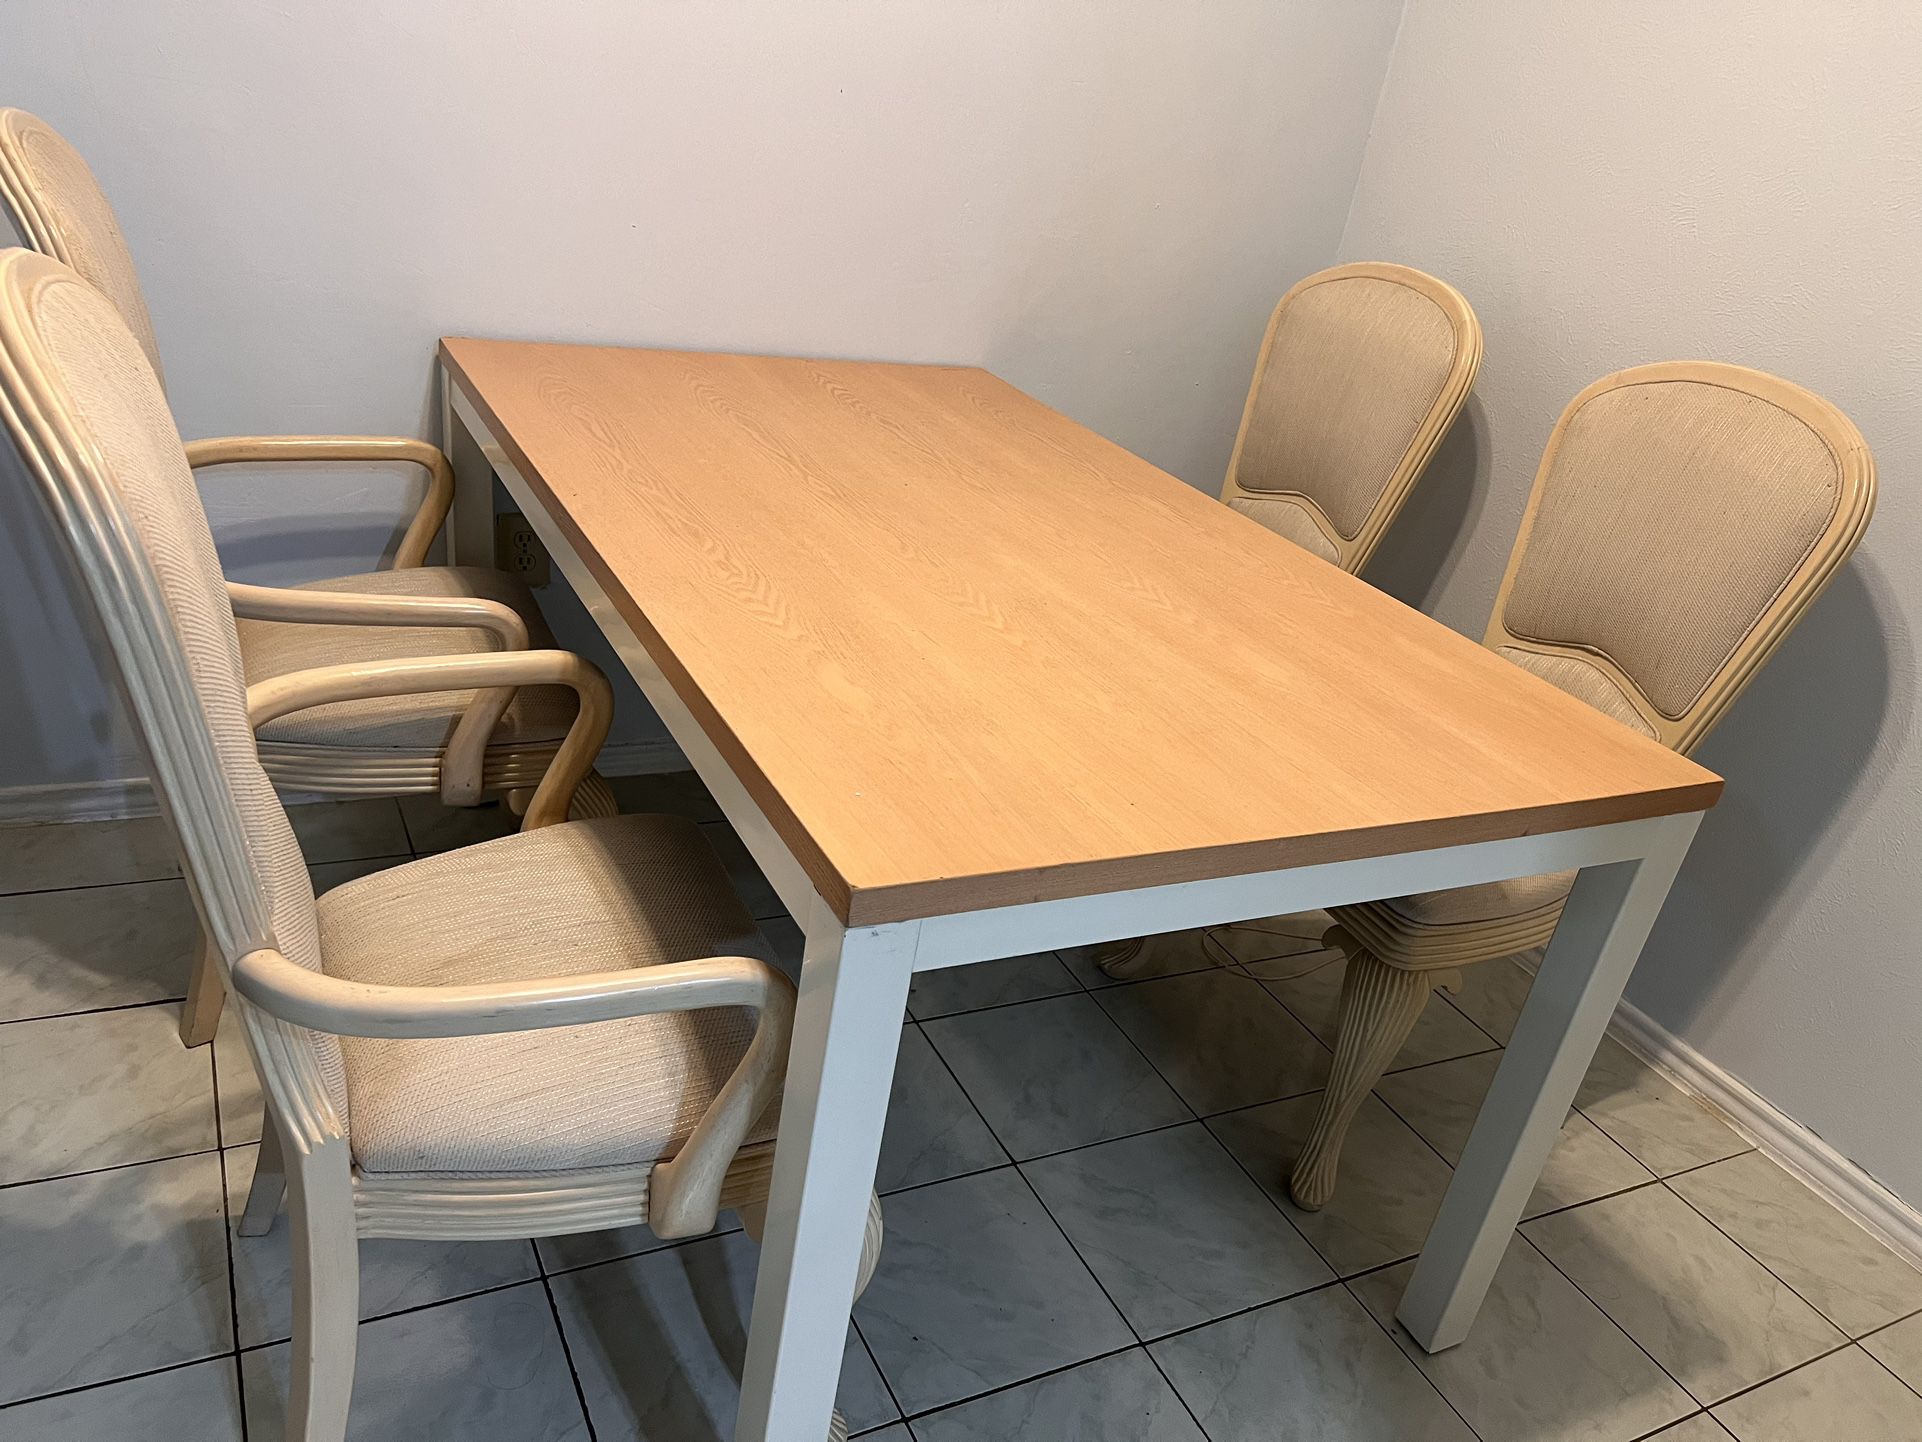 Dine Table With 4 Chairs